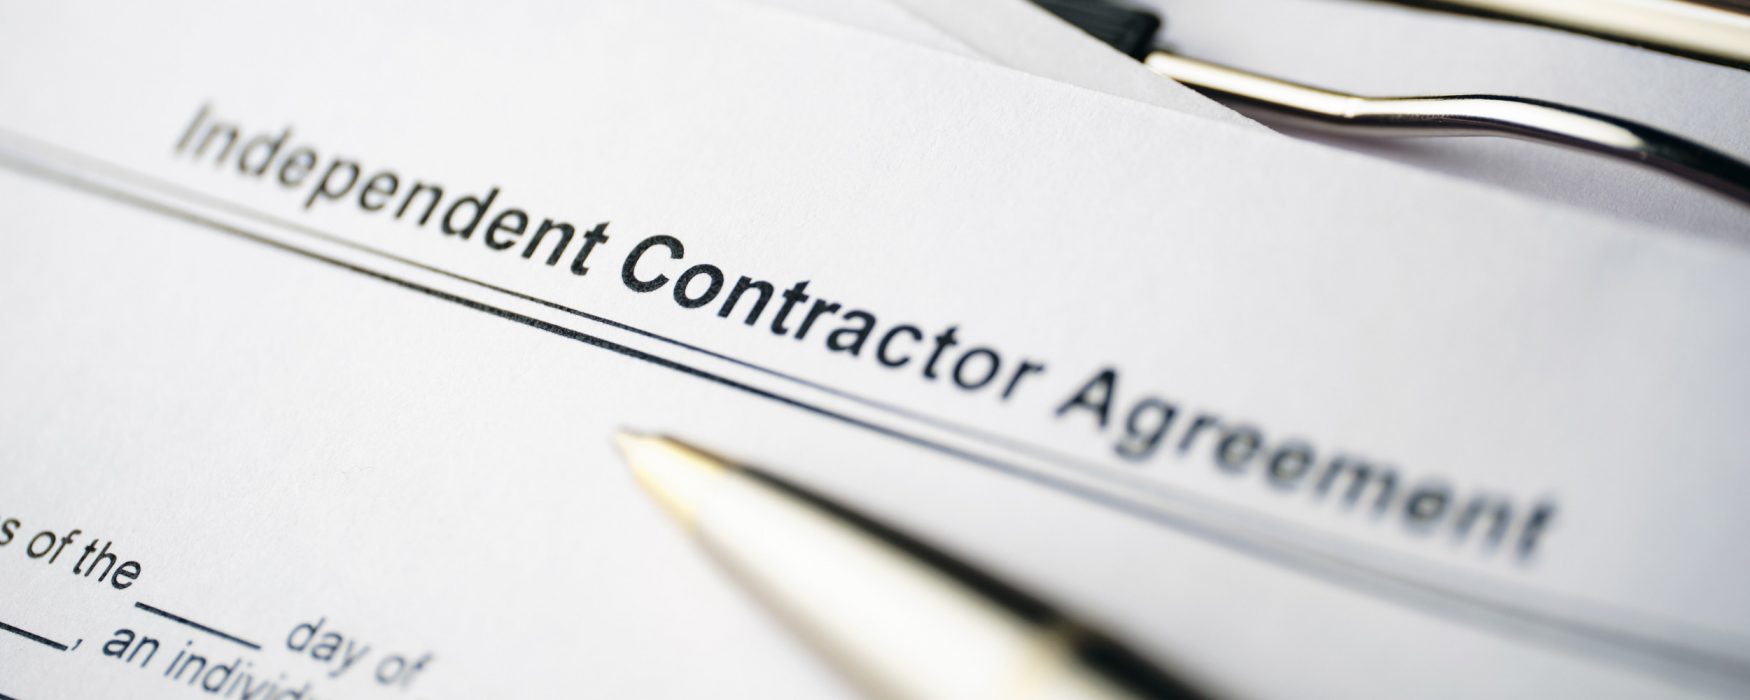 Image of a form with the title "Independent Contractor Agreement"